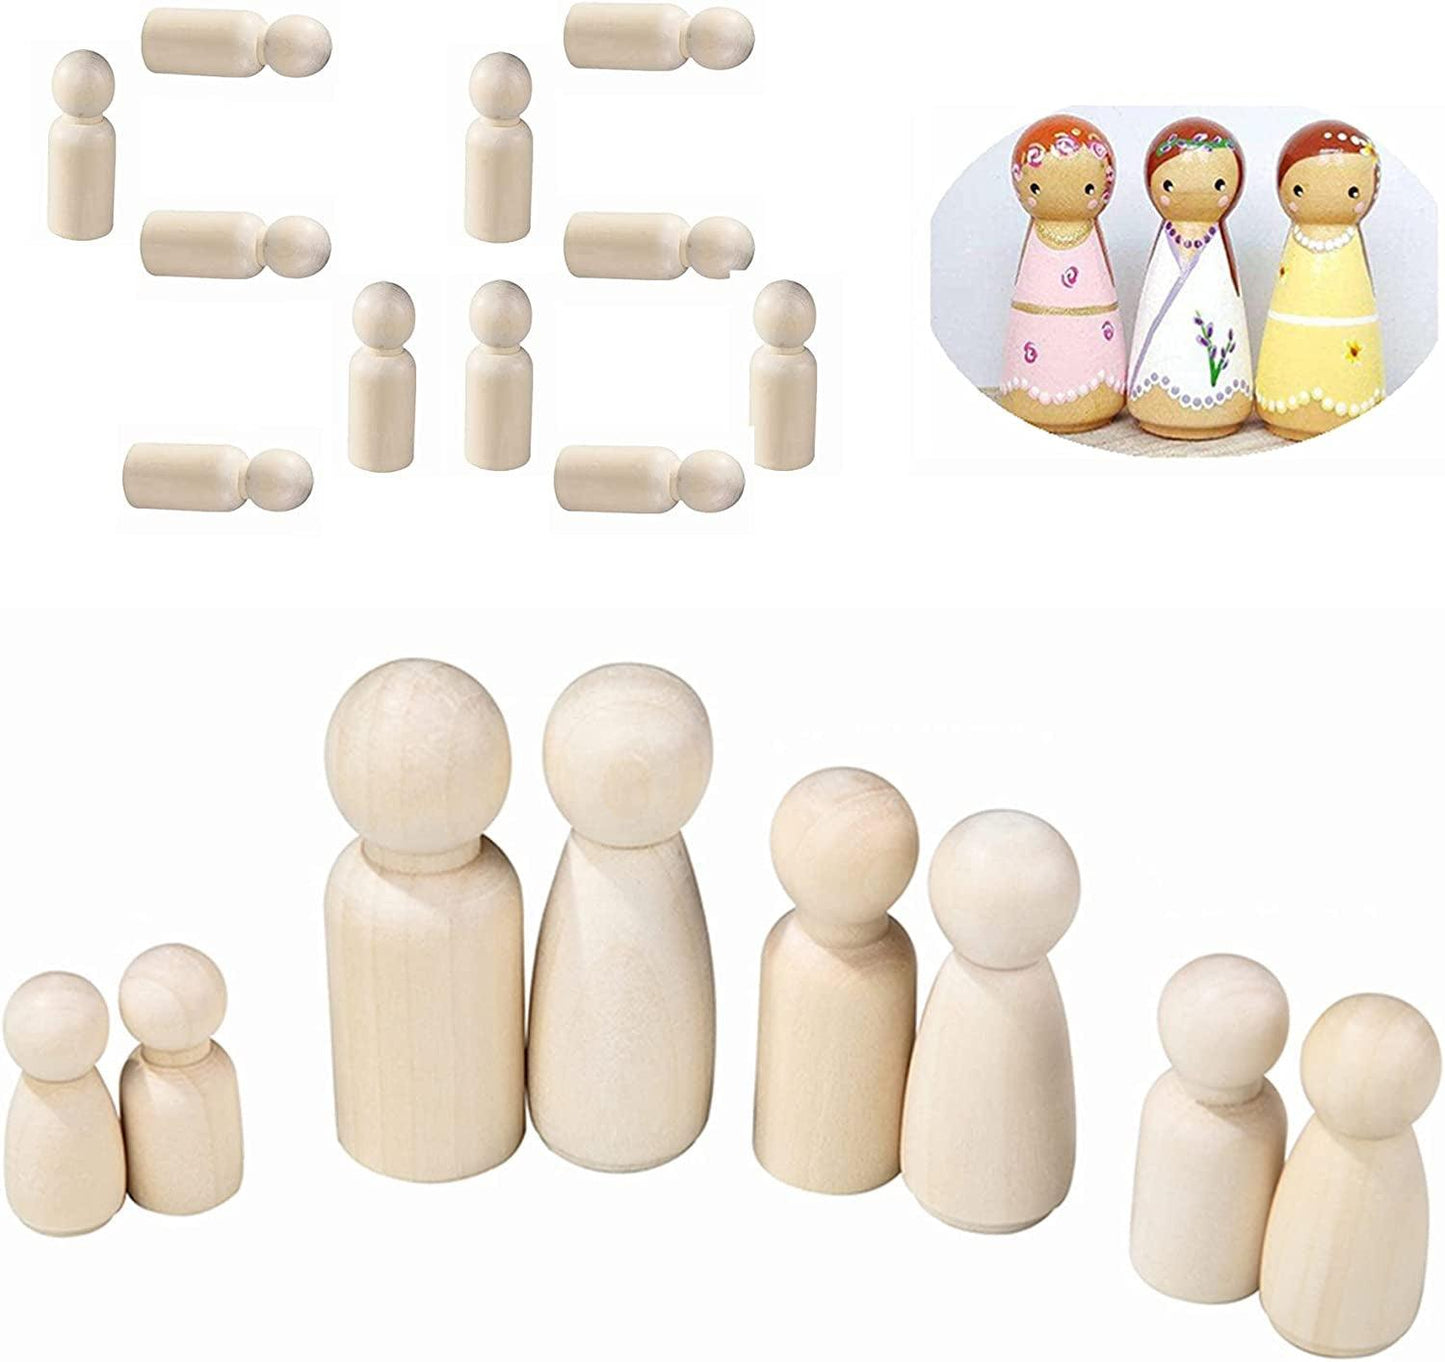 56 PCS Unfinished Natural Wooden Peg Dolls,Little Wooden Peg People for Painted or Craft - WoodArtSupply